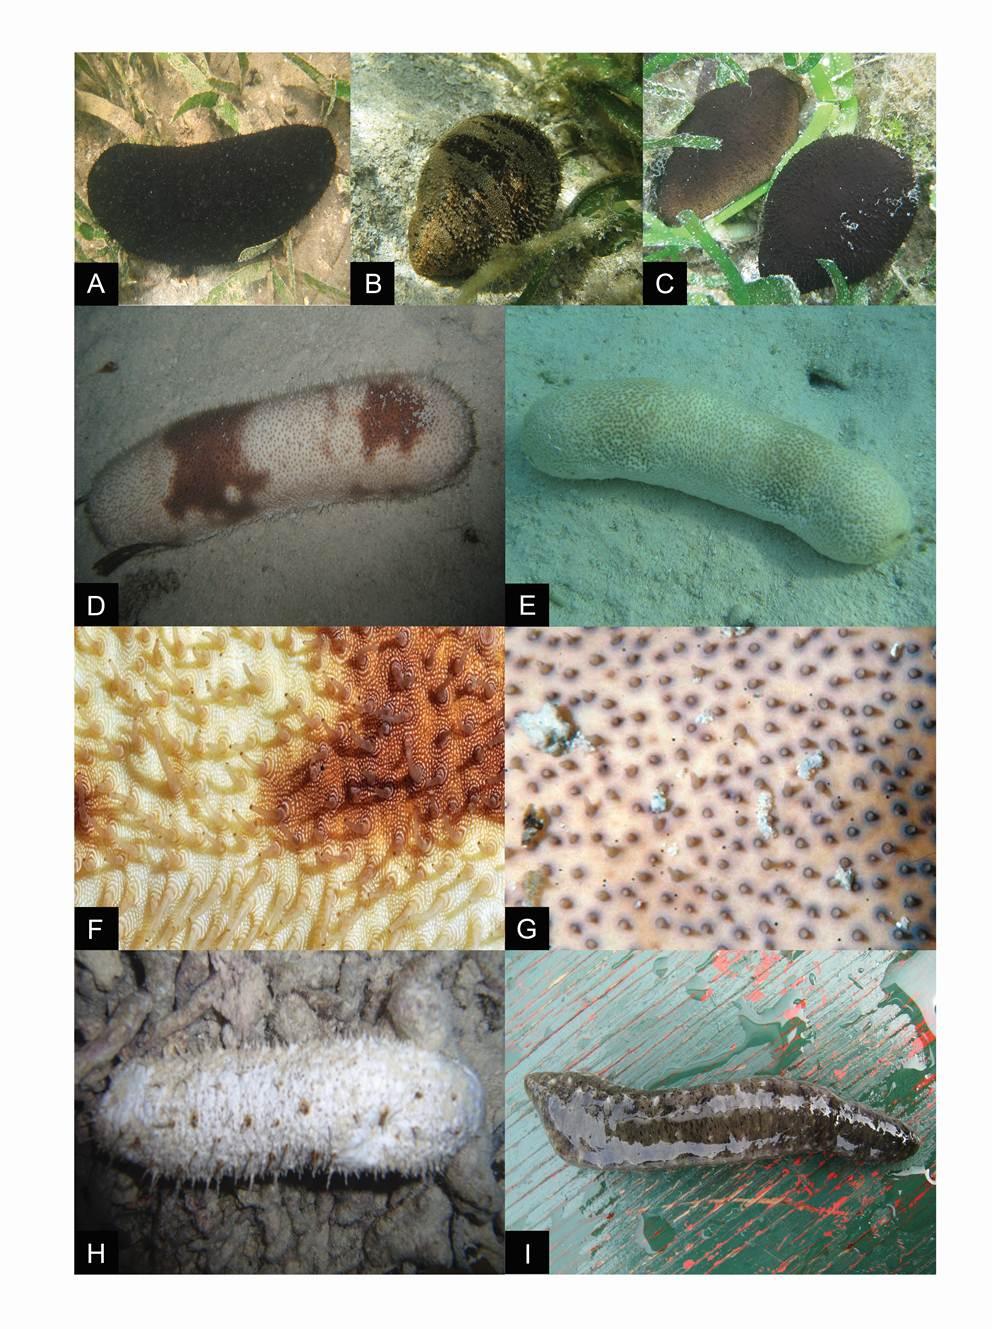 Figure 3. Conspicuous color patterns of selected new records including potential new species. A: Actinopyga?palauensis, B: Actinopyga sp., C: A. sp., D: Bohadschia koellikeri, E: B.